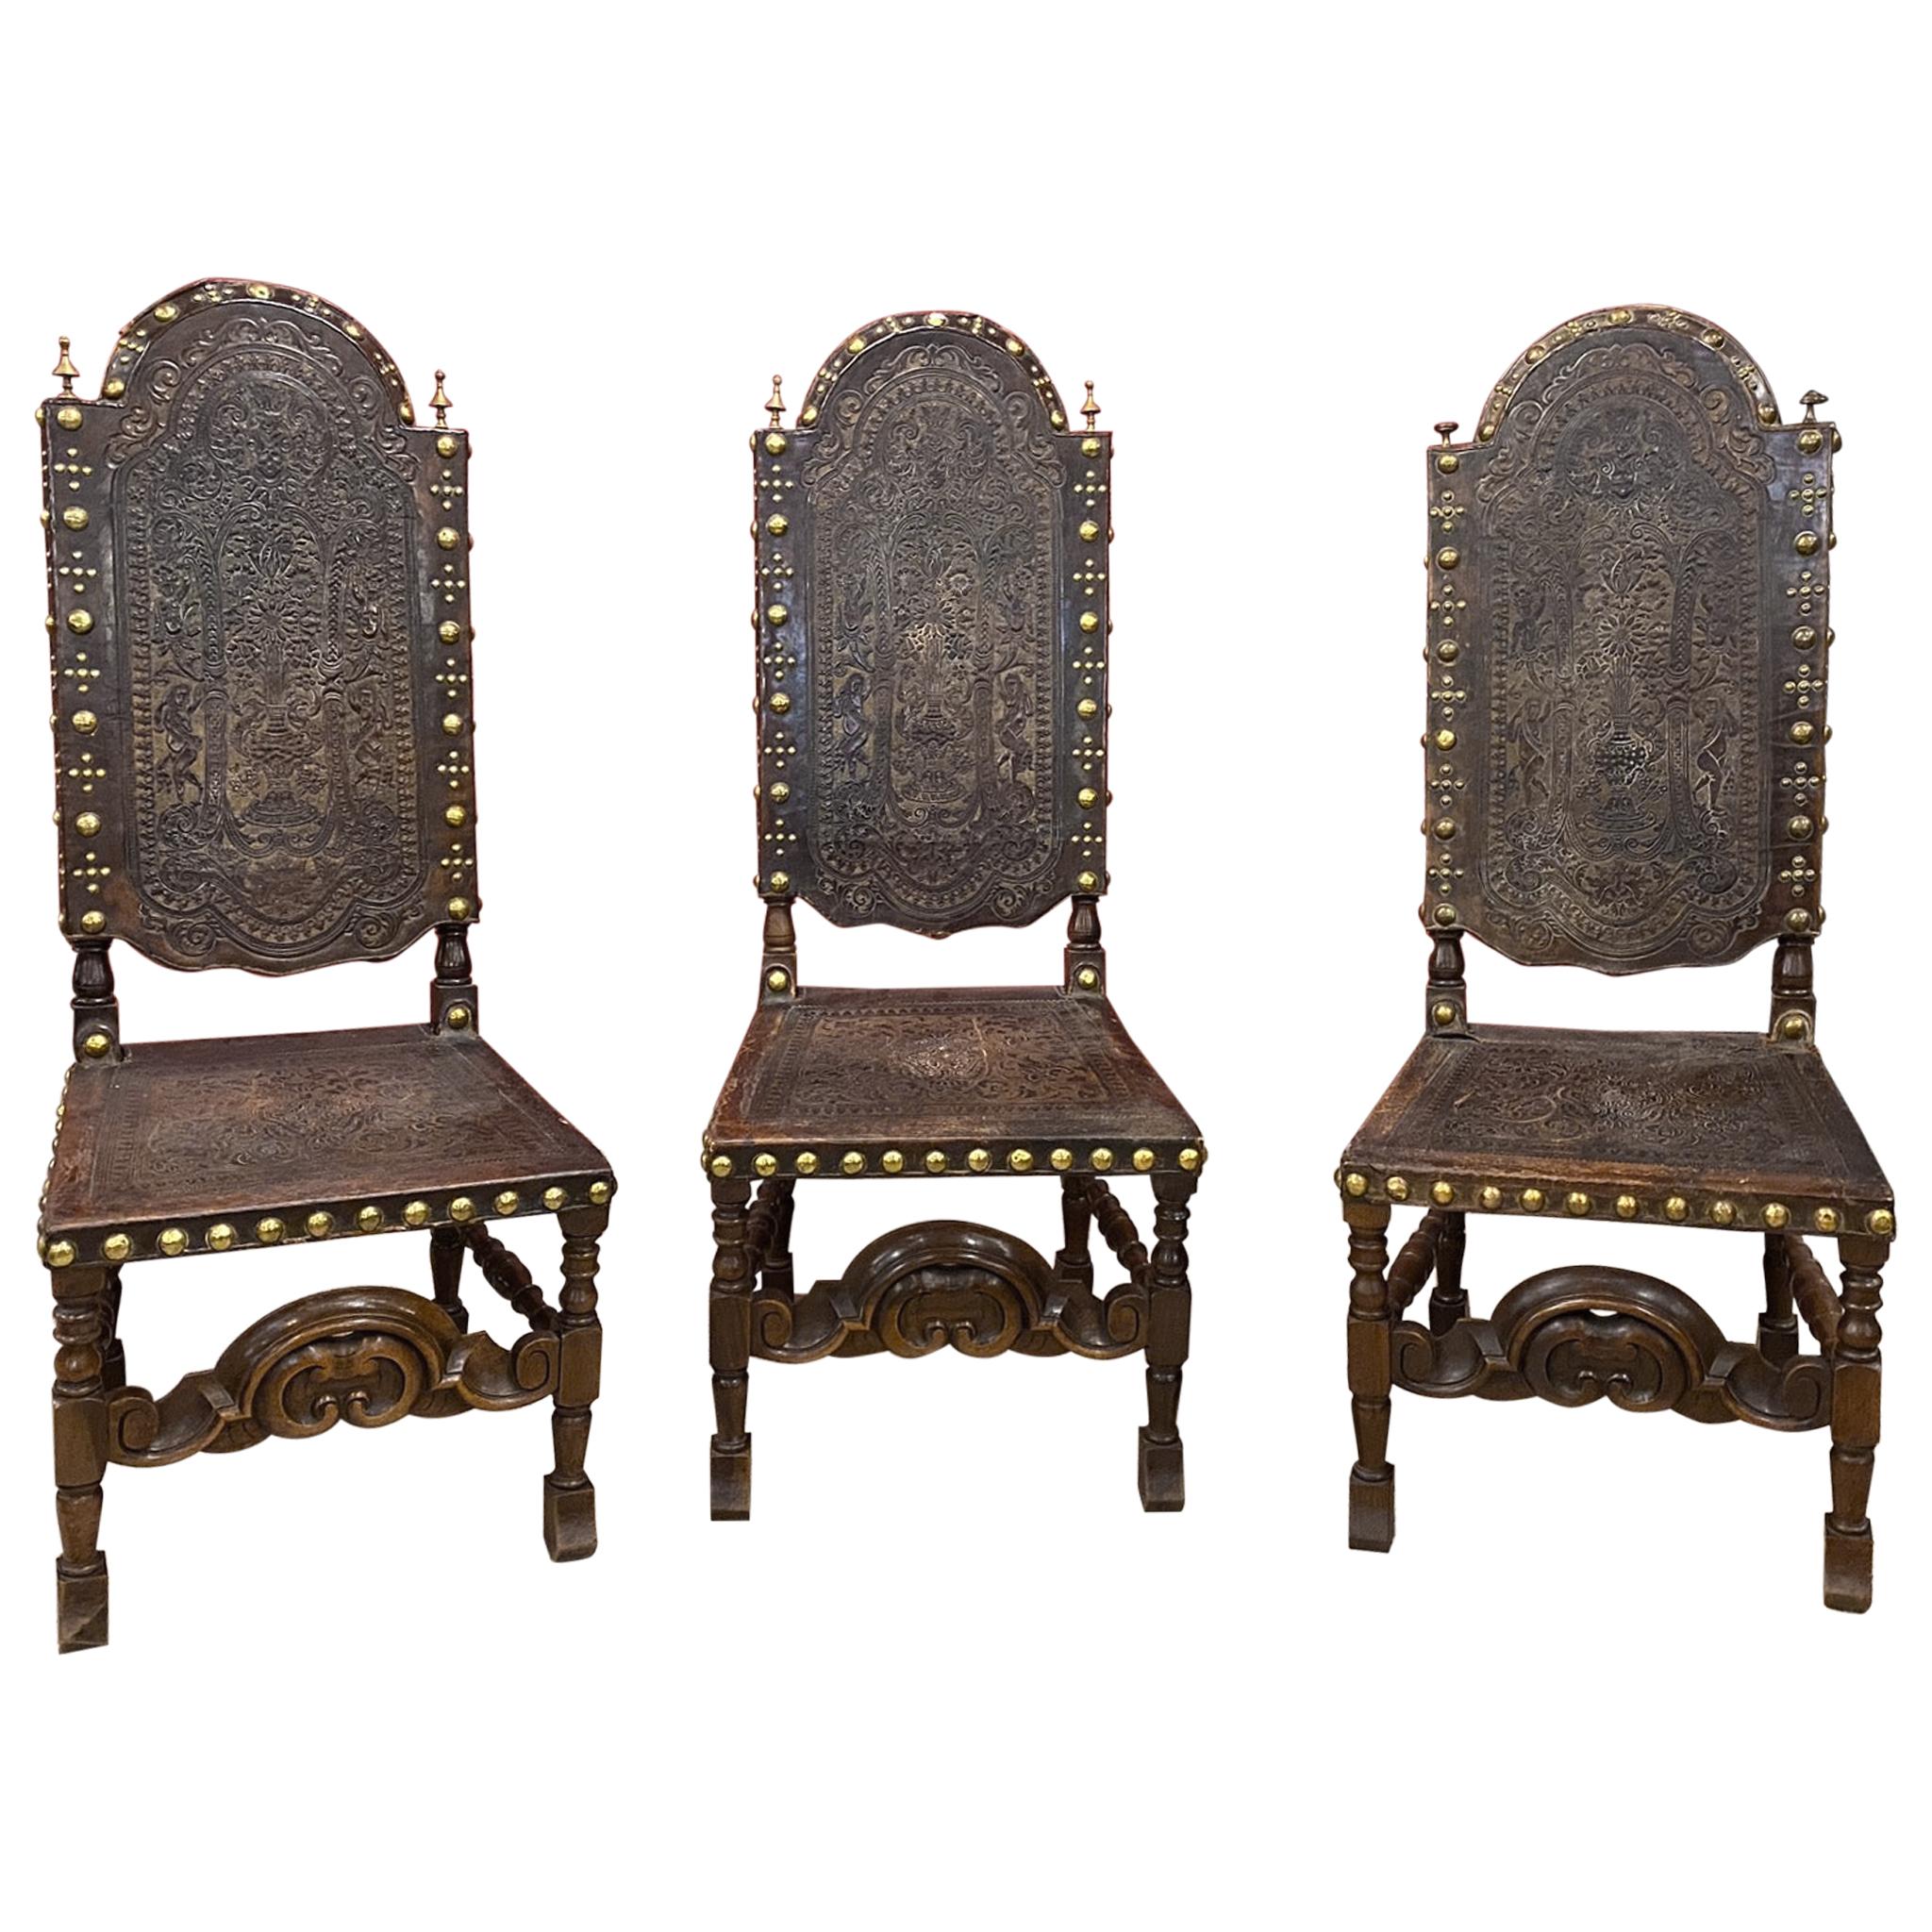 3 High-Backed Chairs, Cordoba Leather Trim with Native American Decor, Spain For Sale